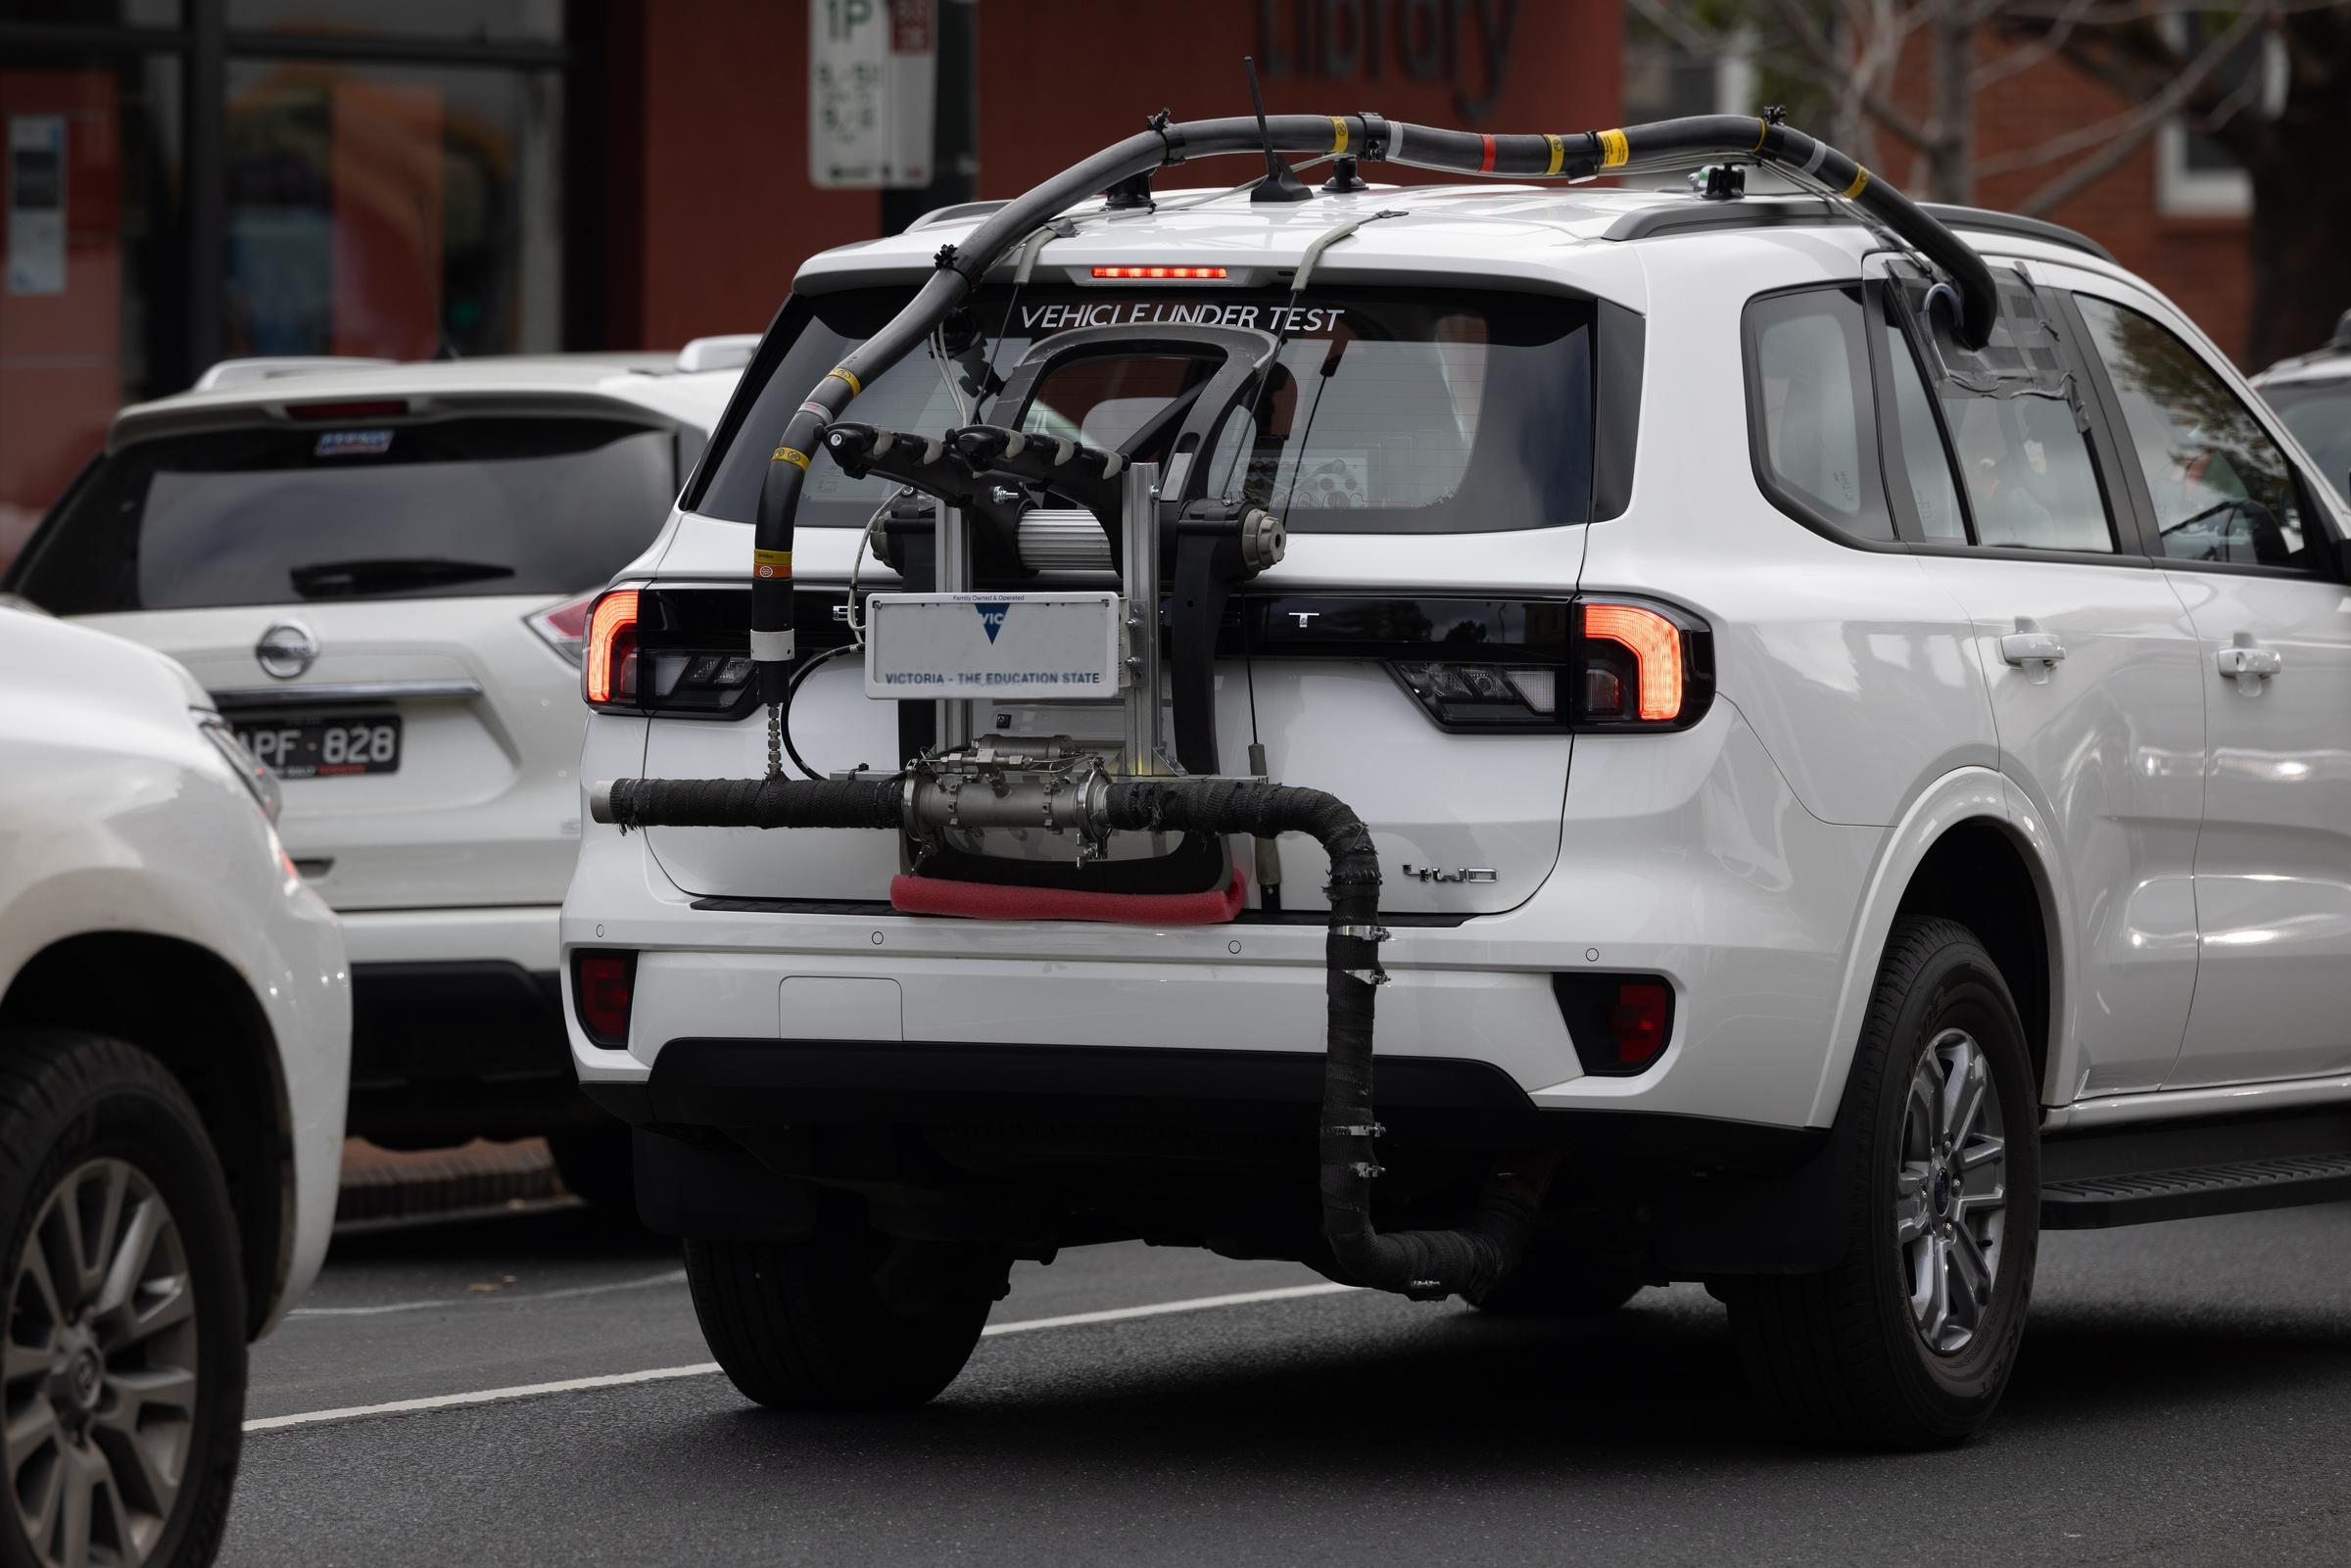 which suvs don’t match their fuel economy stickers in the real world?